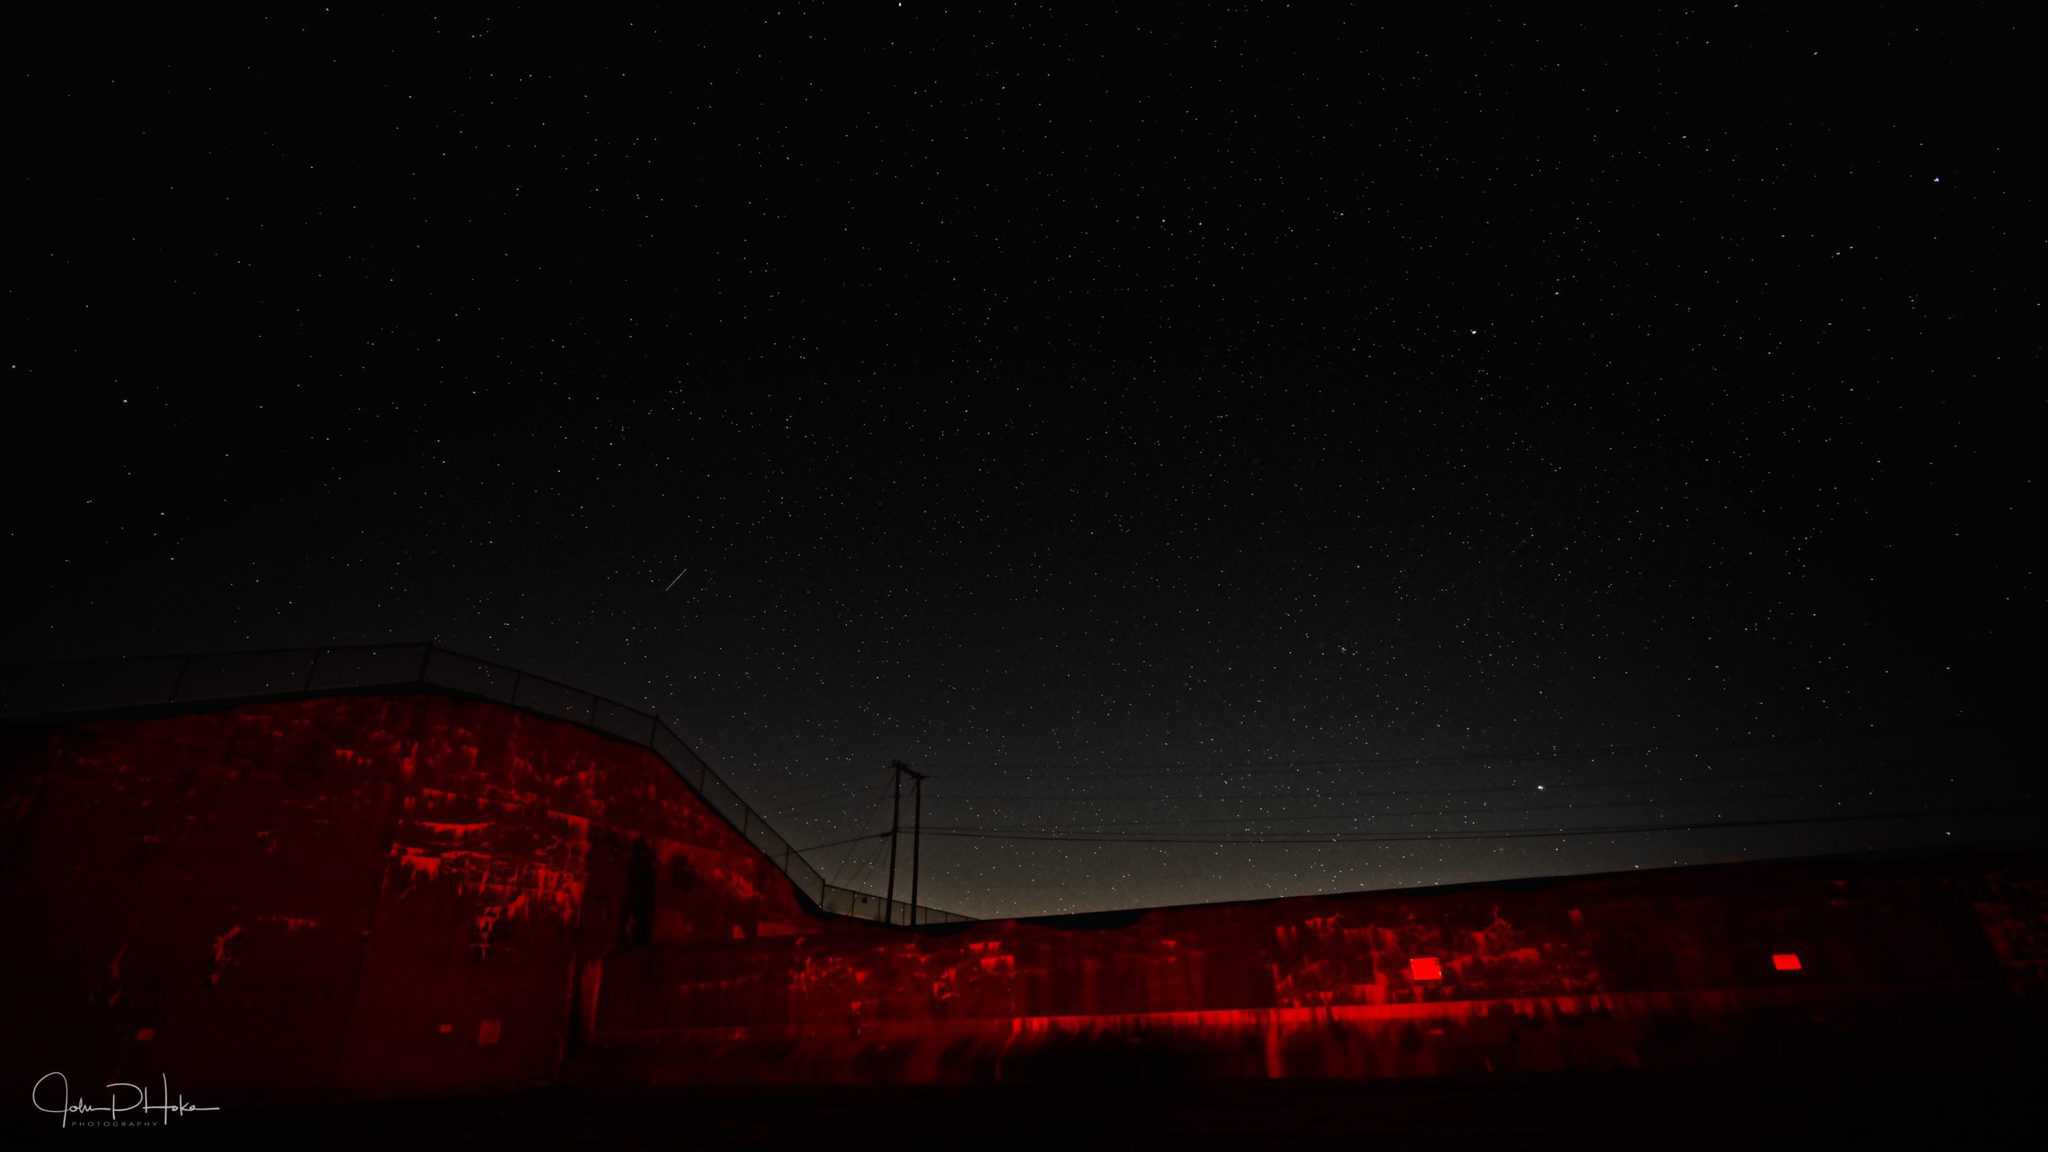 Astrophotography of the night sky above Francis E. Walter Dam in White Haven, PA